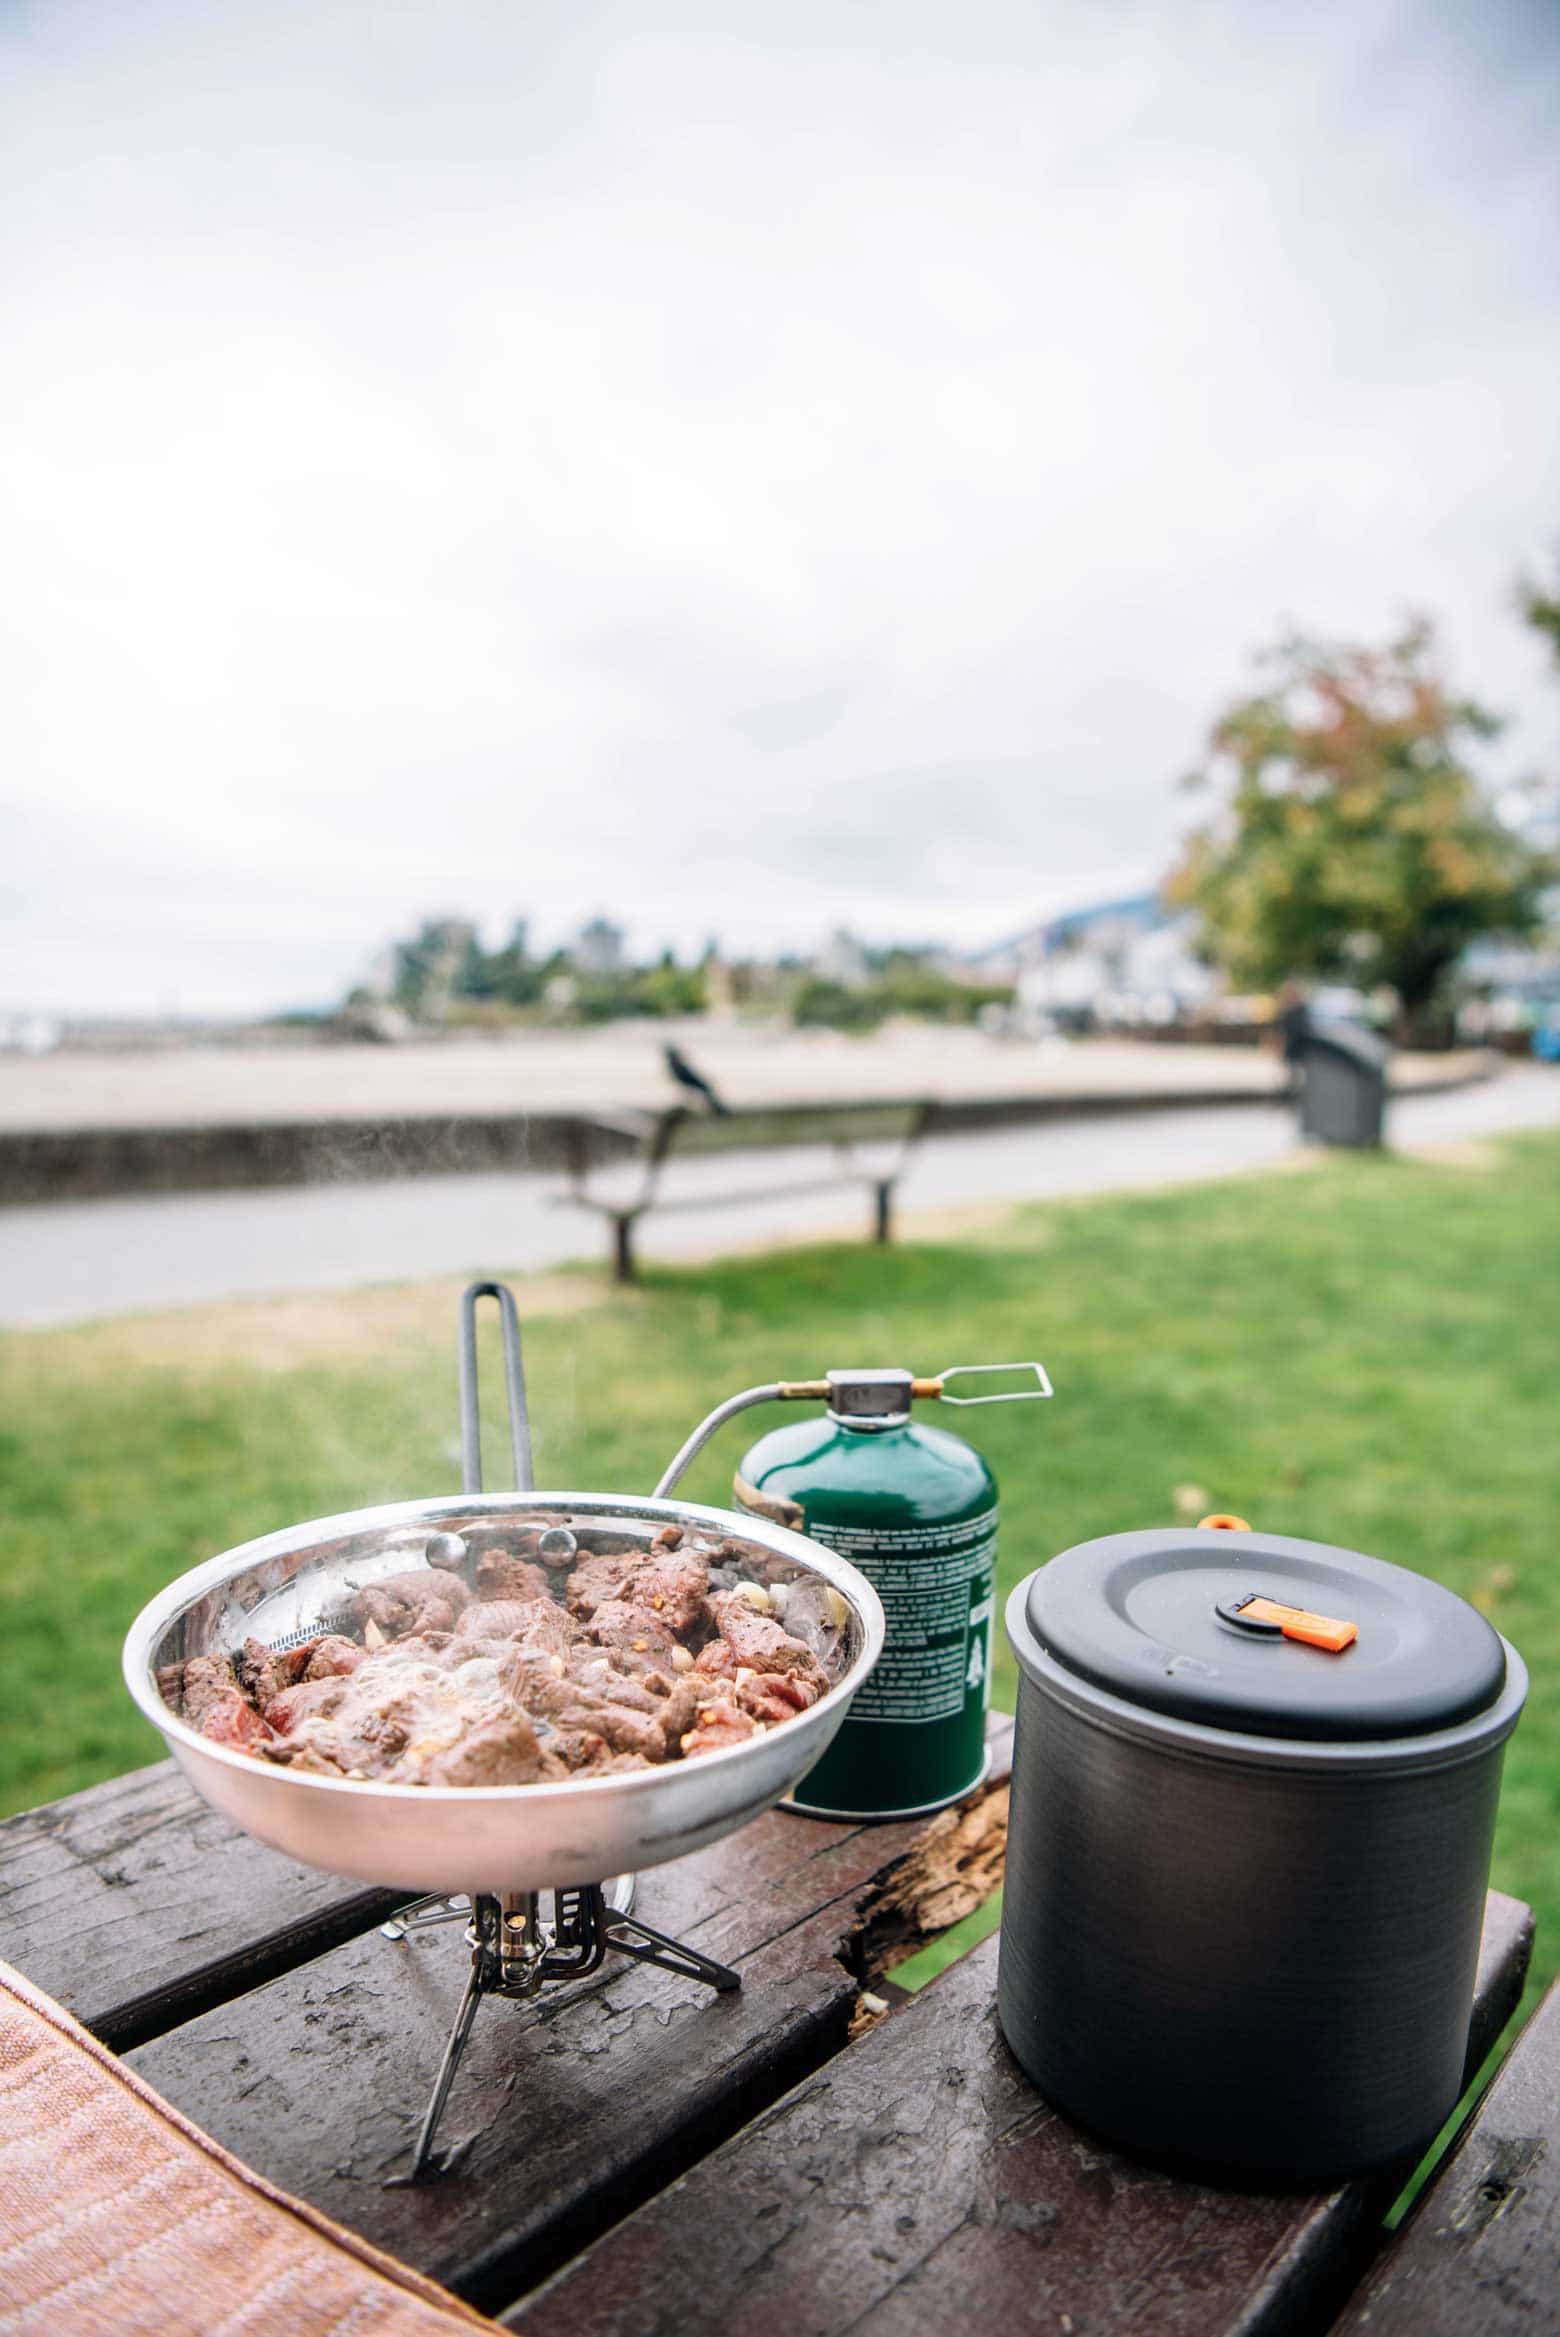 Cooking stir fry on a camp table